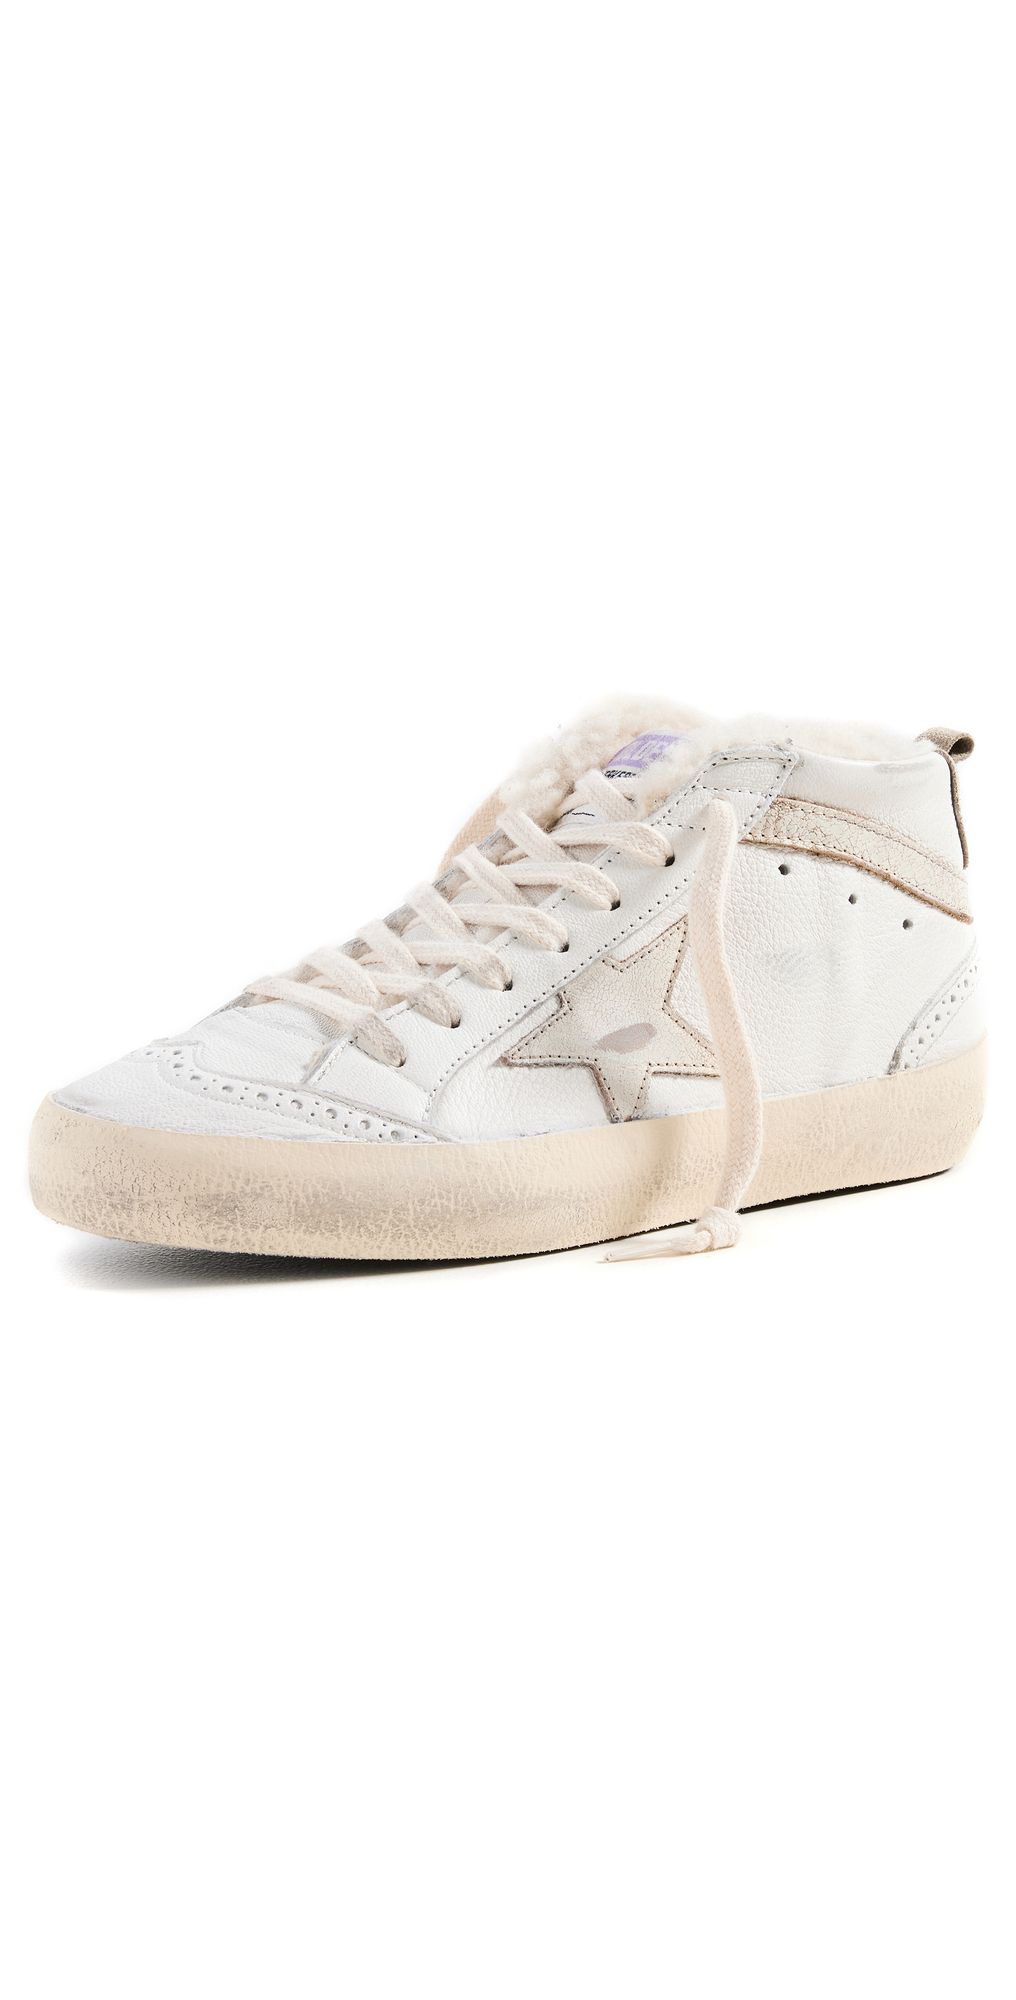 Golden Goose Mid Star Nappa Upper Shiny Leather Star Sneakers | Shopbop